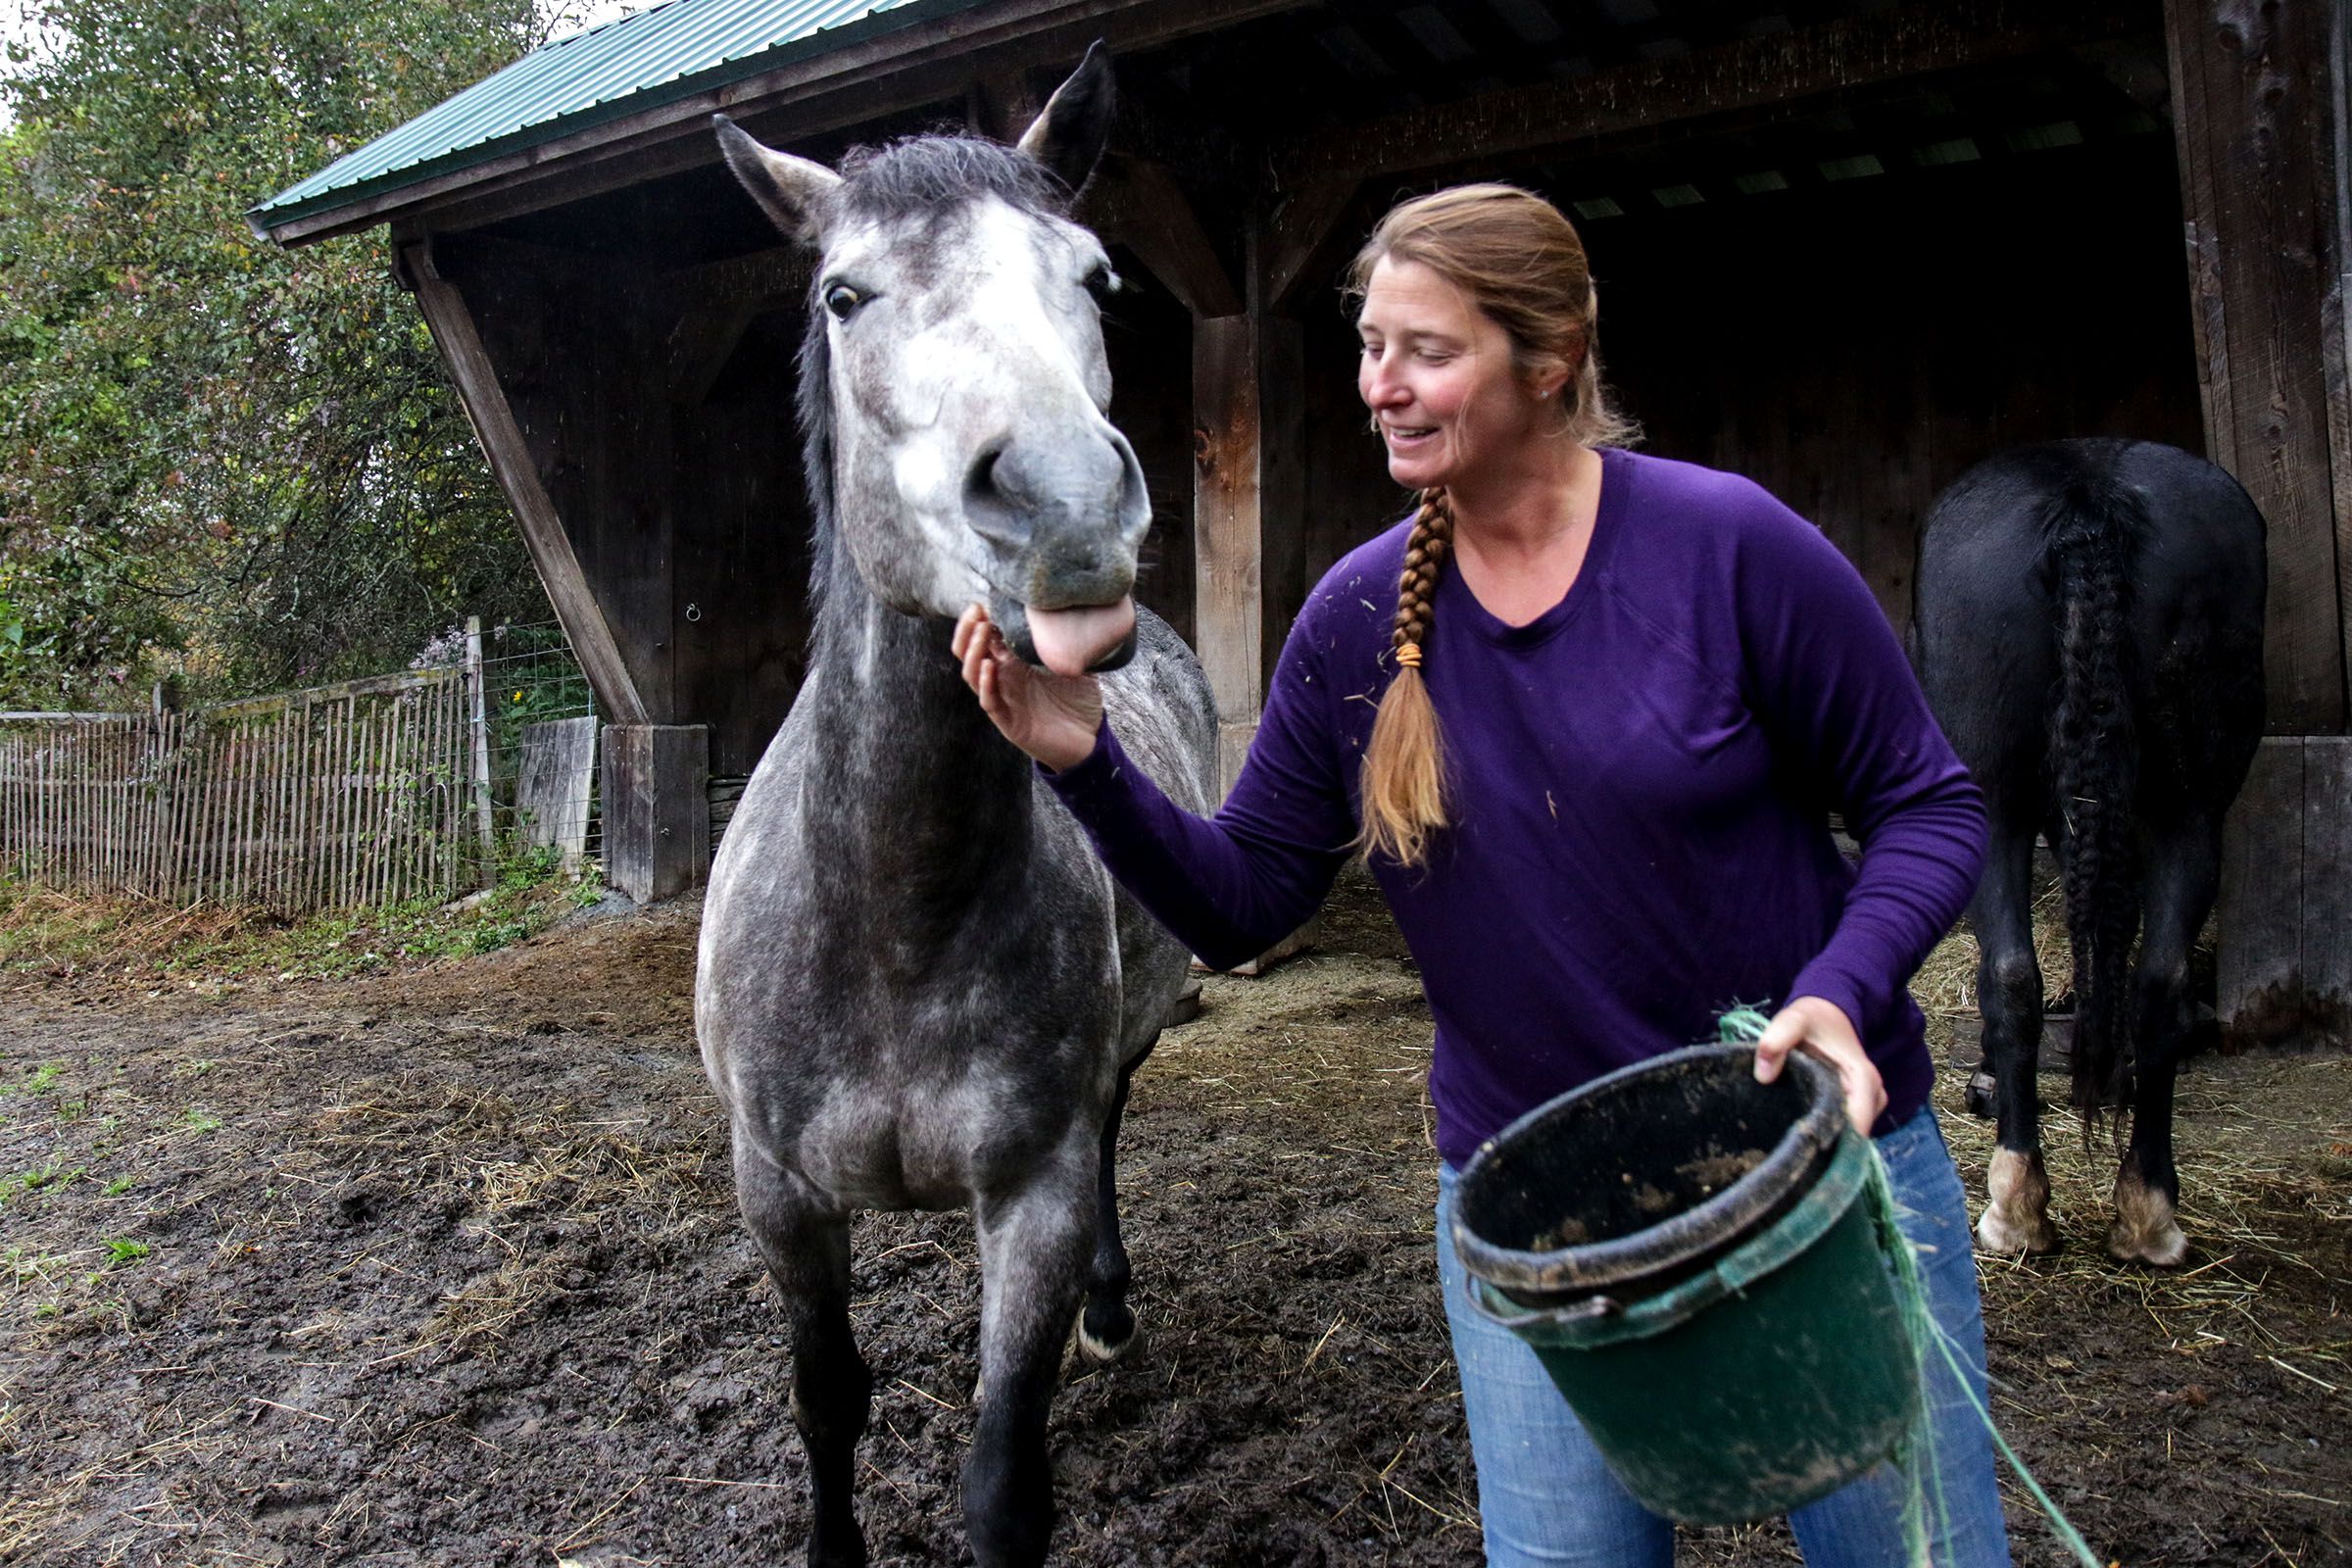 Heather Gallagher, of Cornish, N.H., feeds her horse Hawk during her morning chores at Many Summers Farm on Monday, Oct. 8, 2018. The farm specializes in grass-fed beef and lamb, pasture-raised pork and cheese and yogurt made from organic milk. (Valley News - August Frank) Copyright Valley News. May not be reprinted or used online without permission. Send requests to permission@vnews.com.